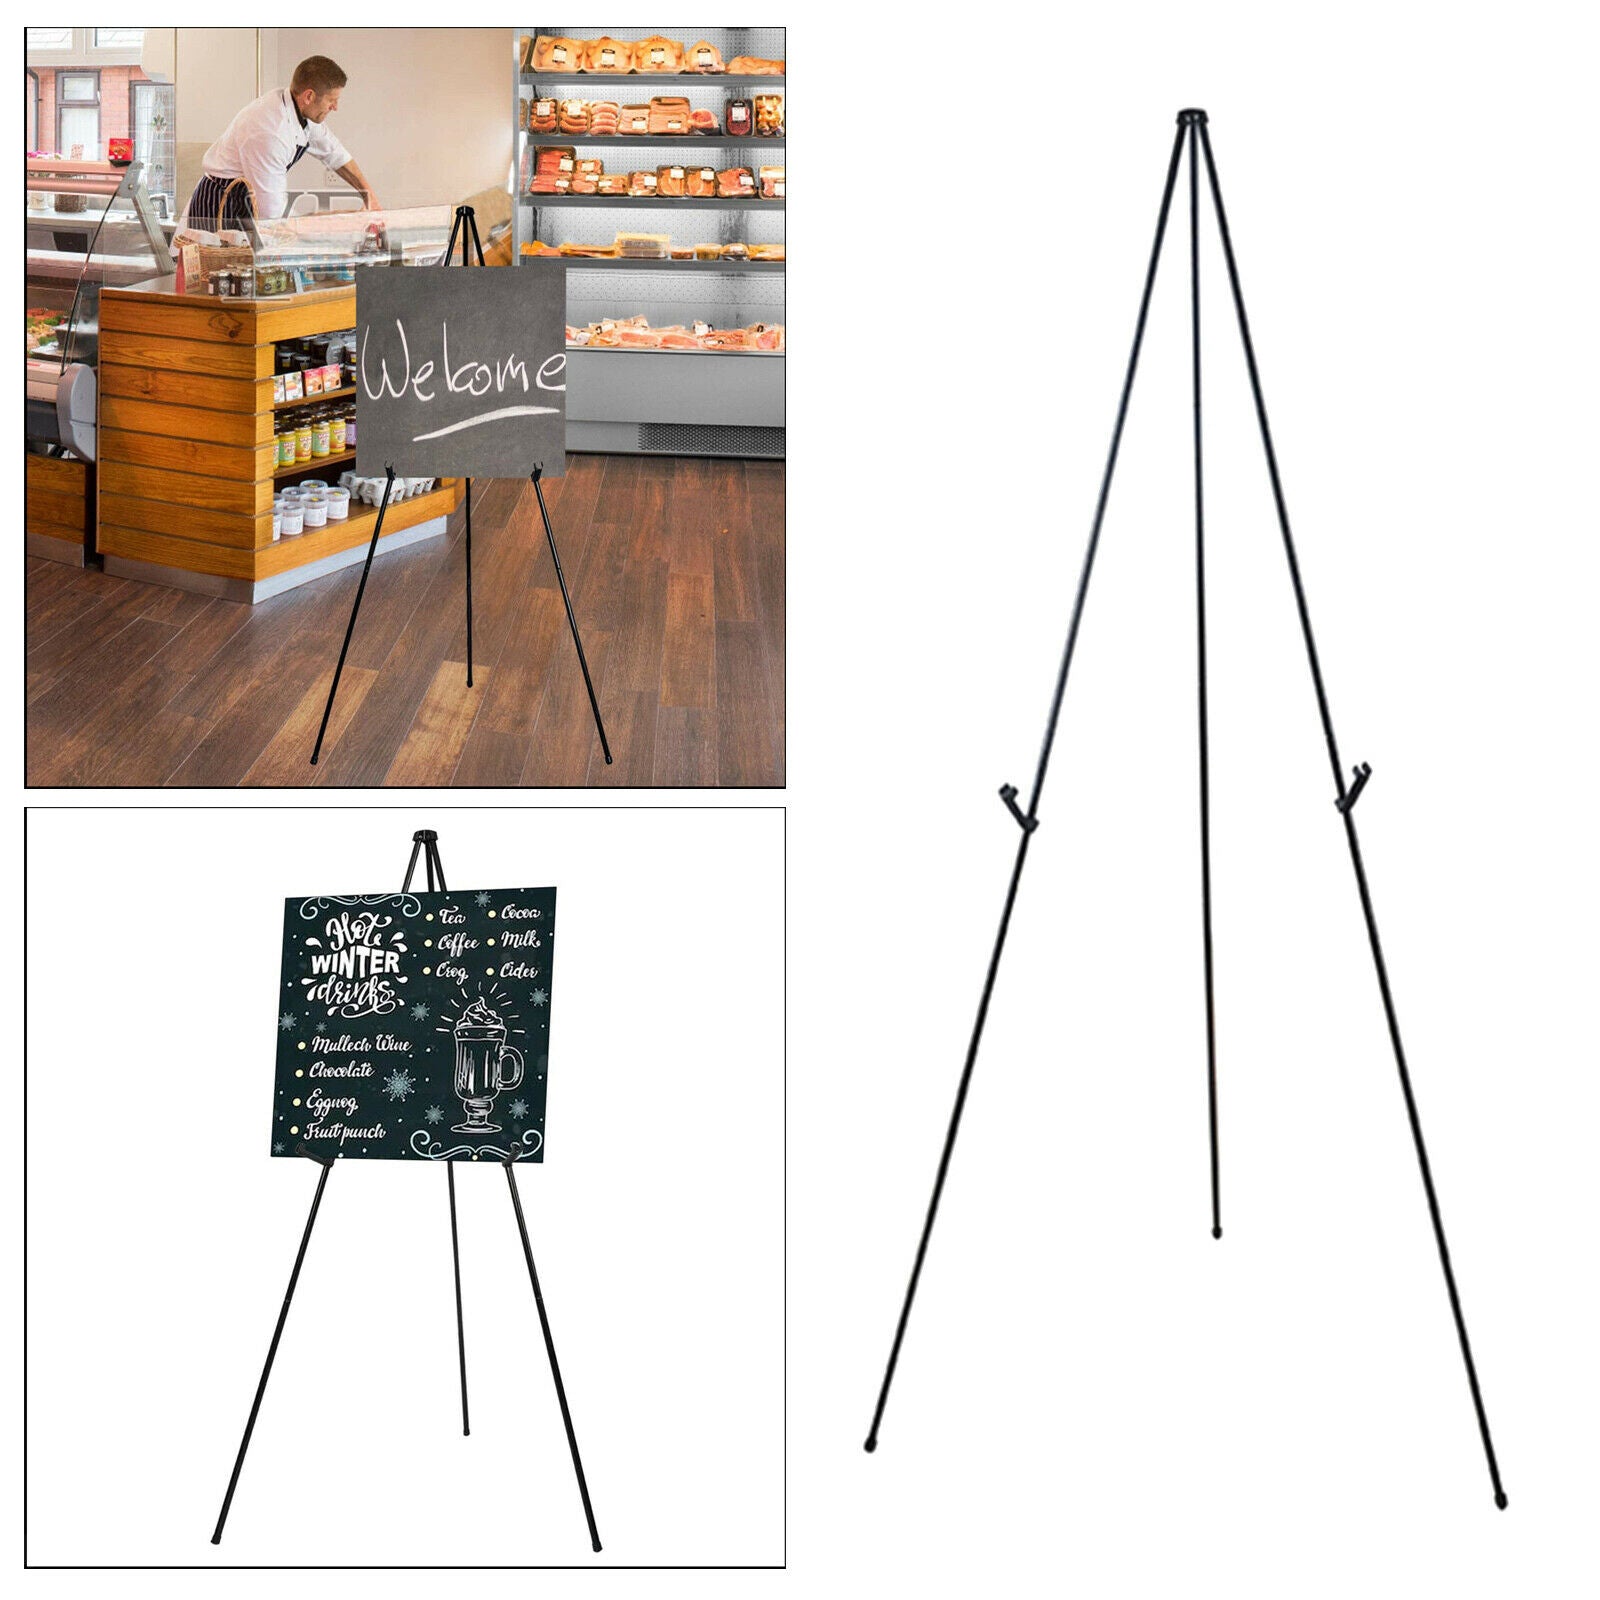 Folding Painter Painting Easel Tripod Display Stand Holder Steel Poster